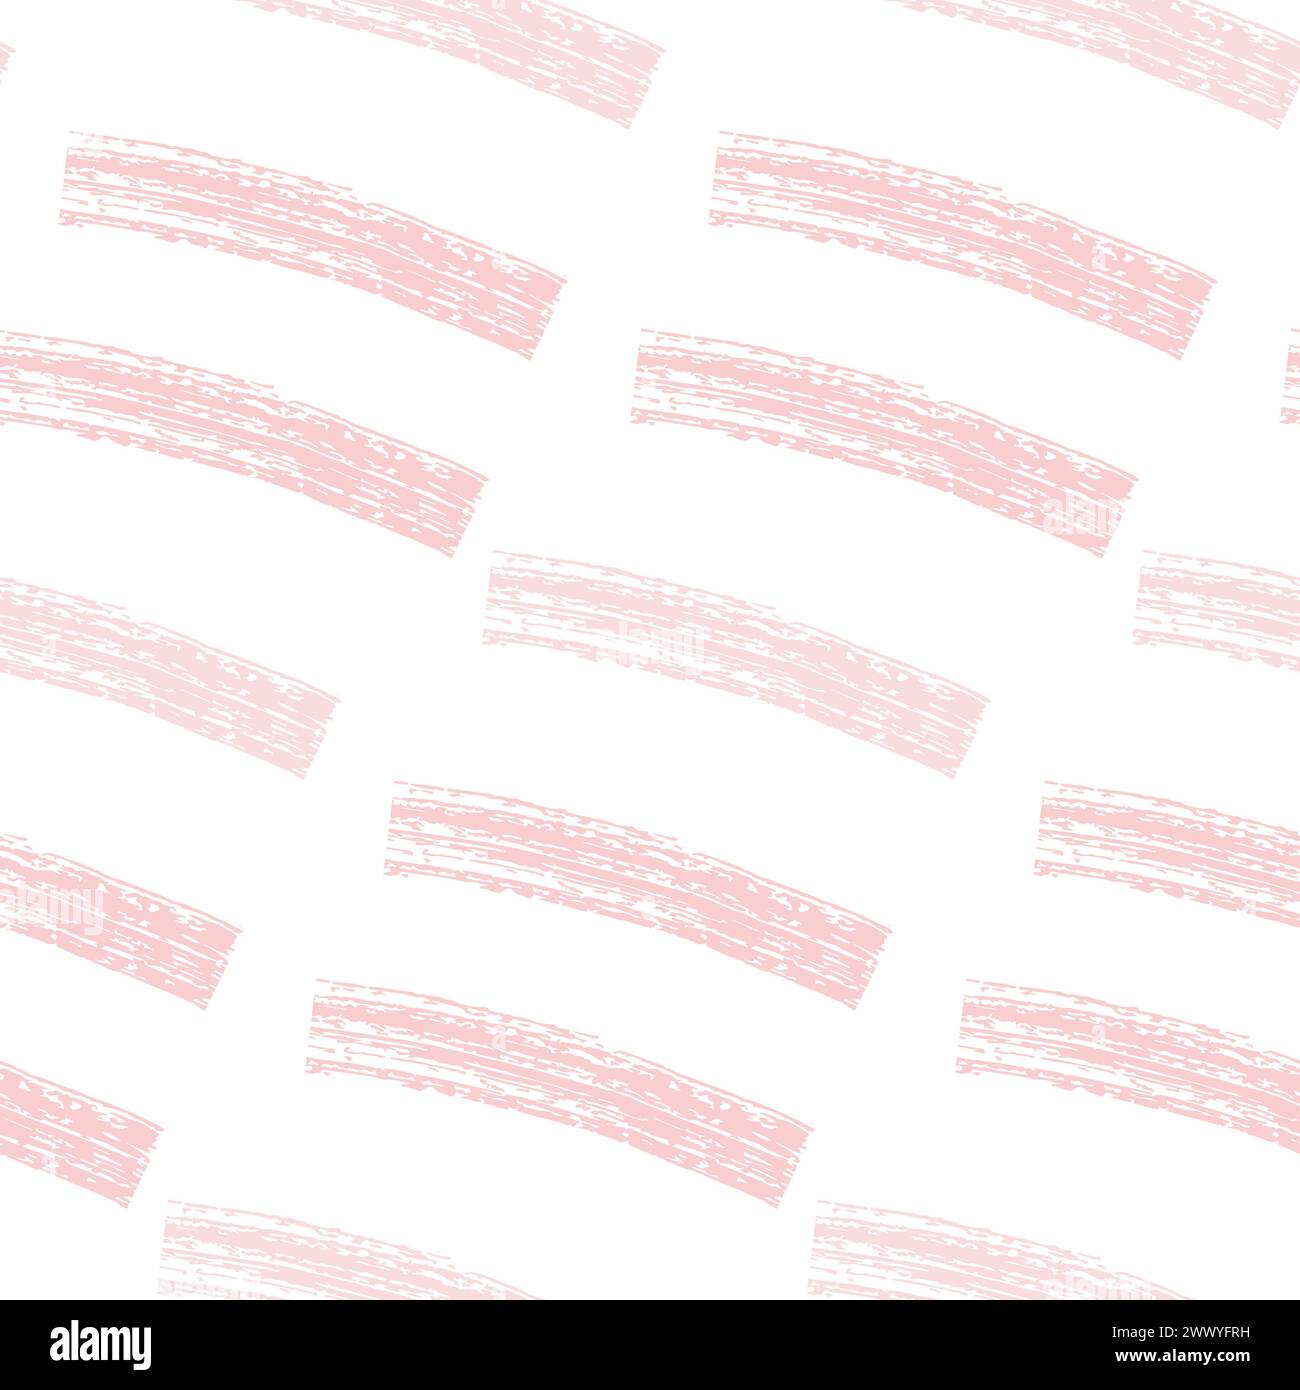 Seamless vector pattern made by hand drawn thin paint strokes. horizontal dry brush stripes texture. Stock Vector